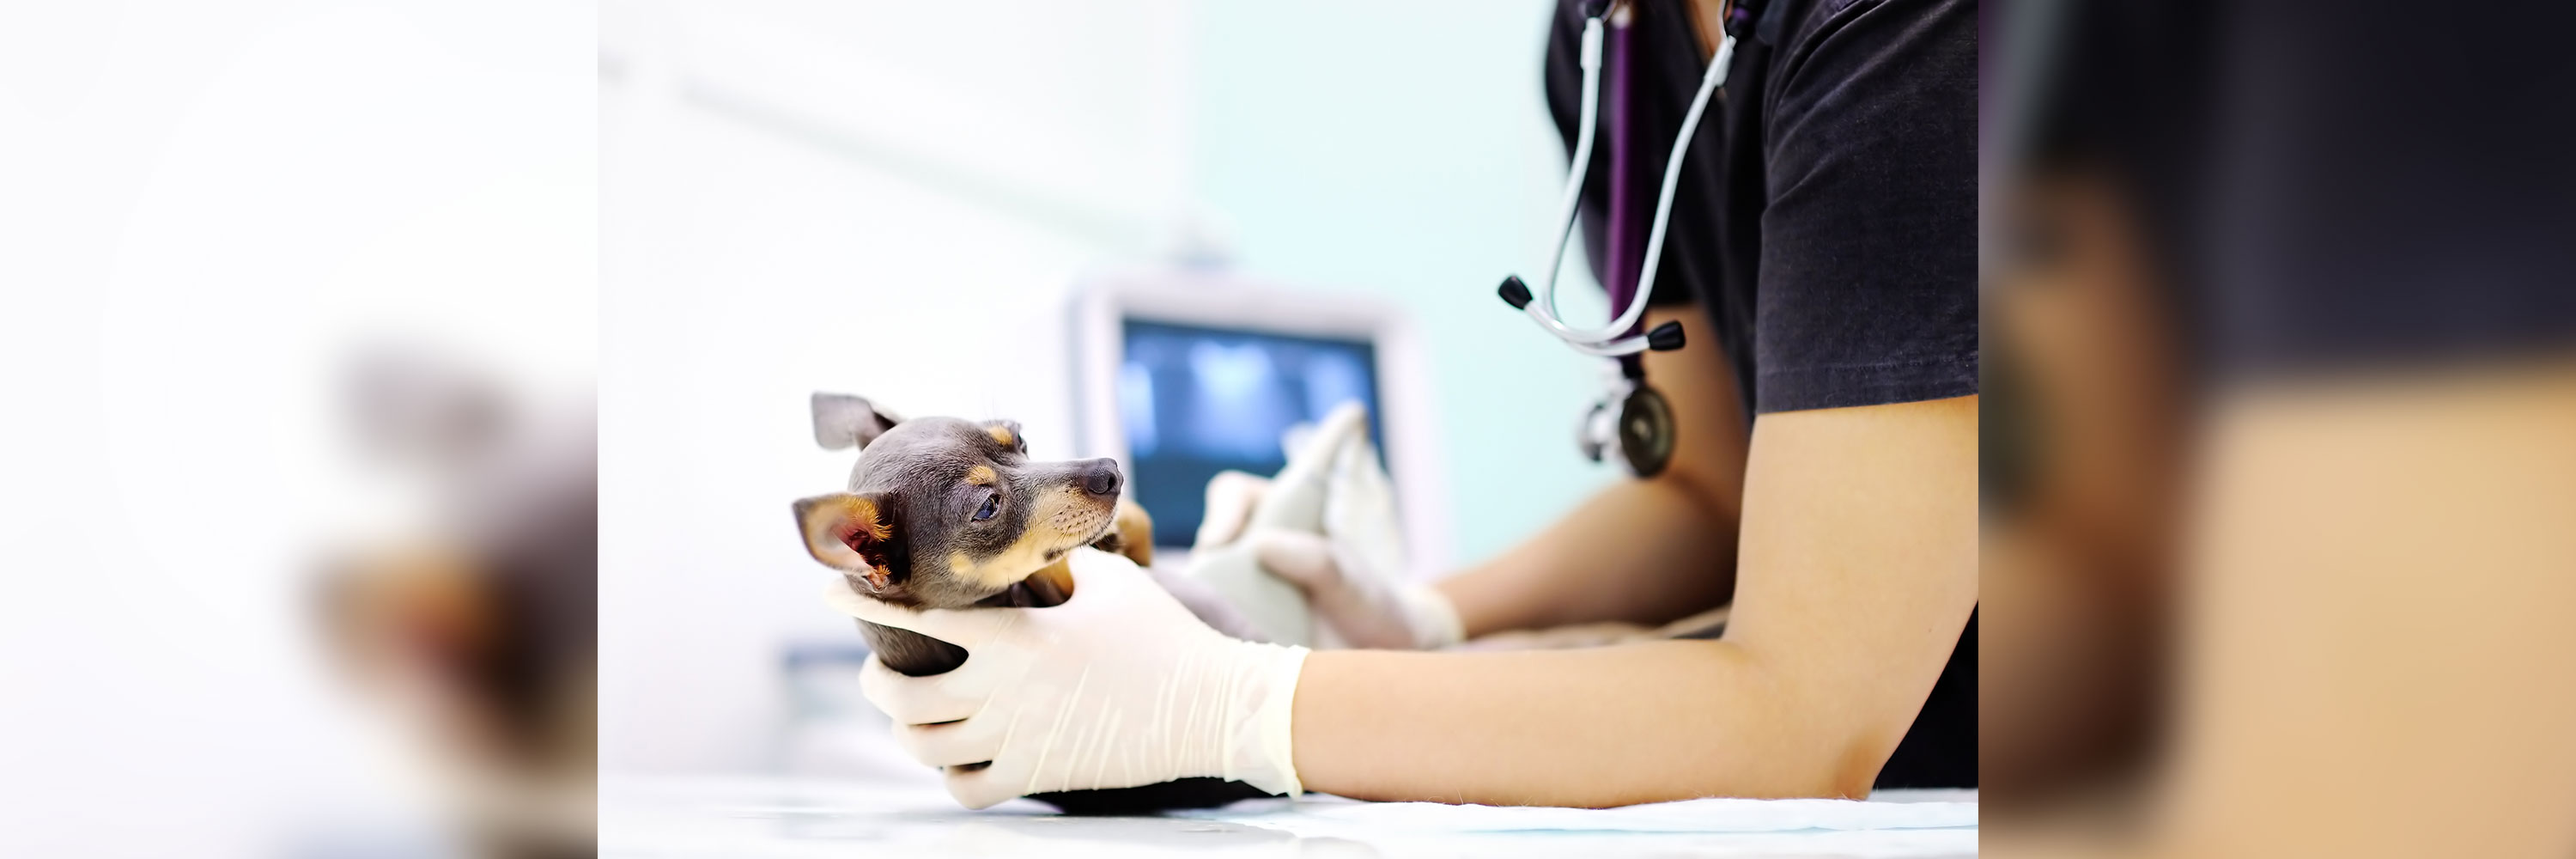 how much does a ultrasound for a dog cost